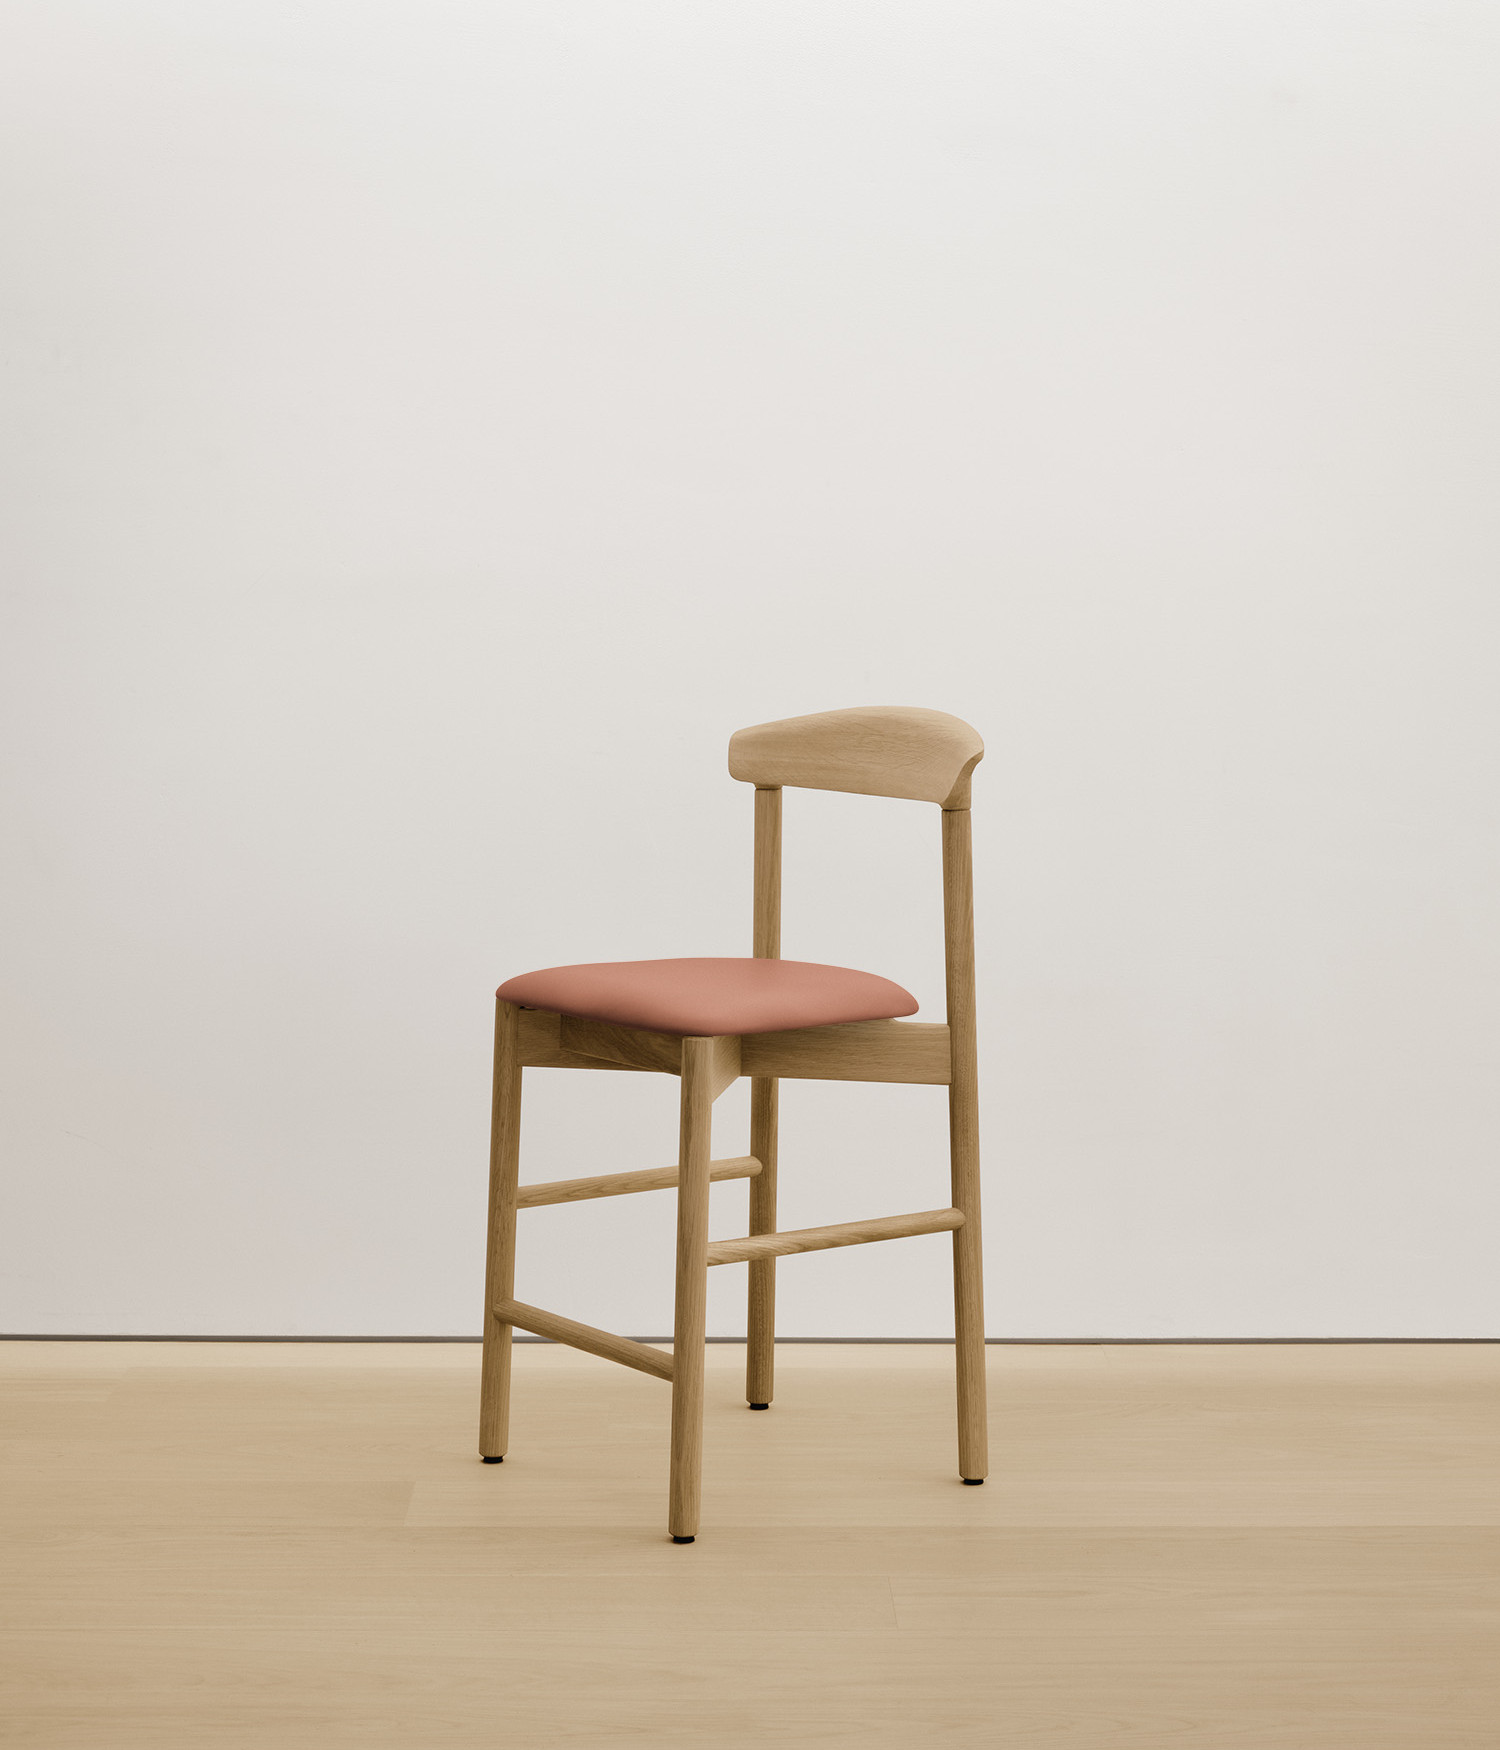  white-oak stool with  color upholstered seat